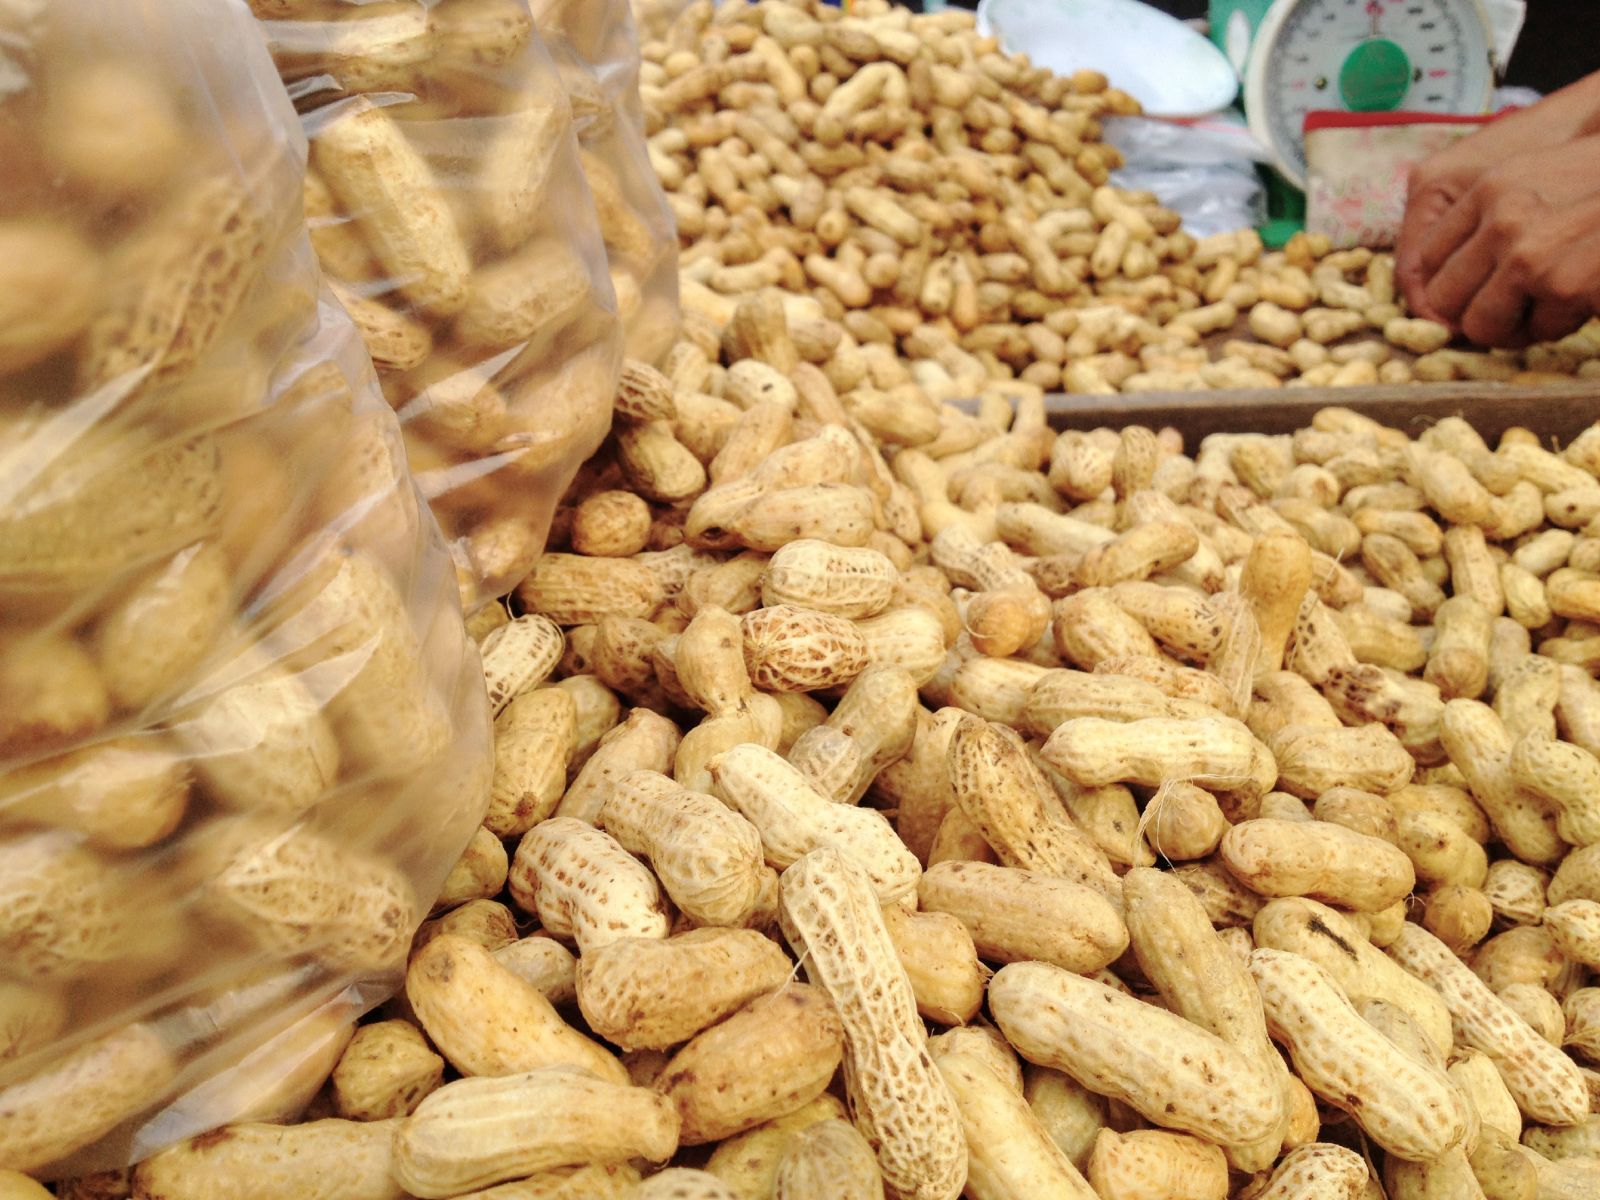 A person weighs whole peanuts - peanut farmers